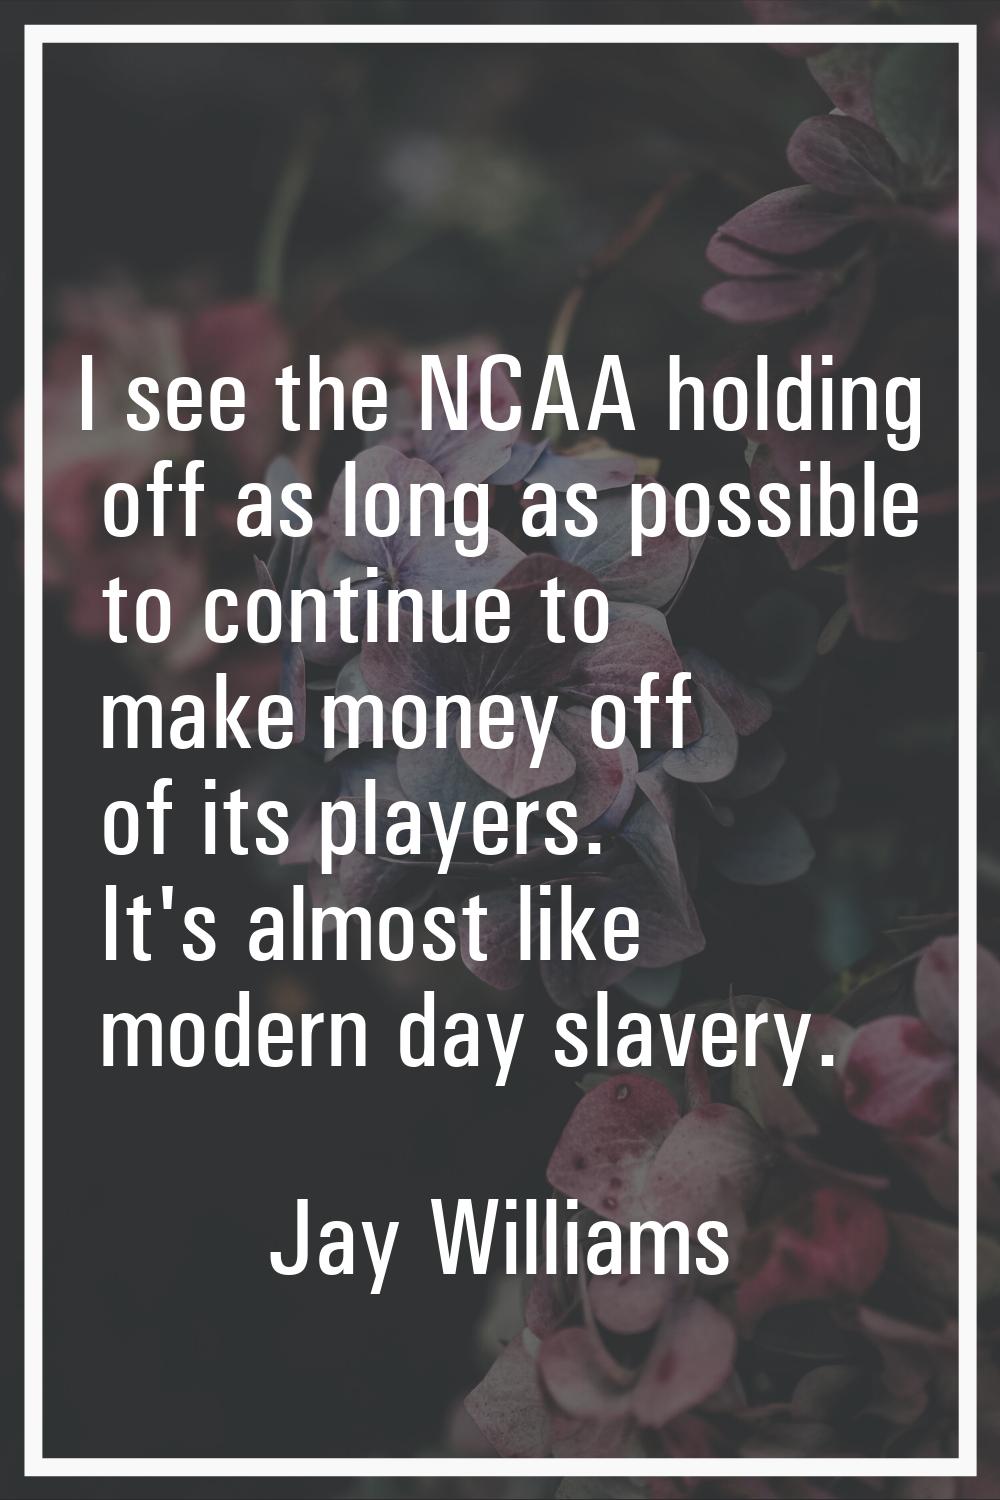 I see the NCAA holding off as long as possible to continue to make money off of its players. It's a